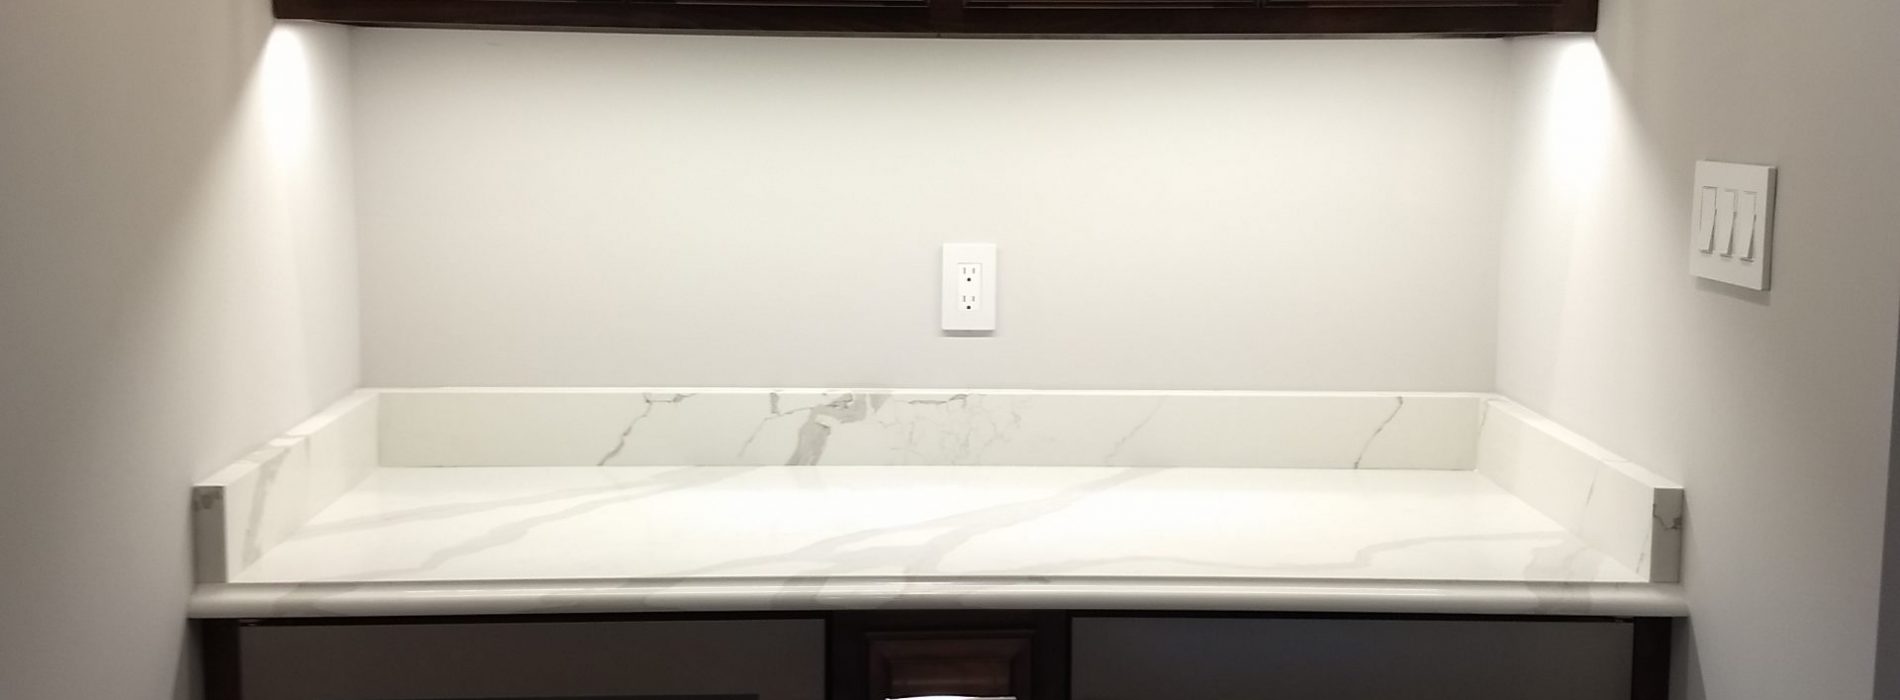 marble counter with dark wood cabinets for plates or drinks